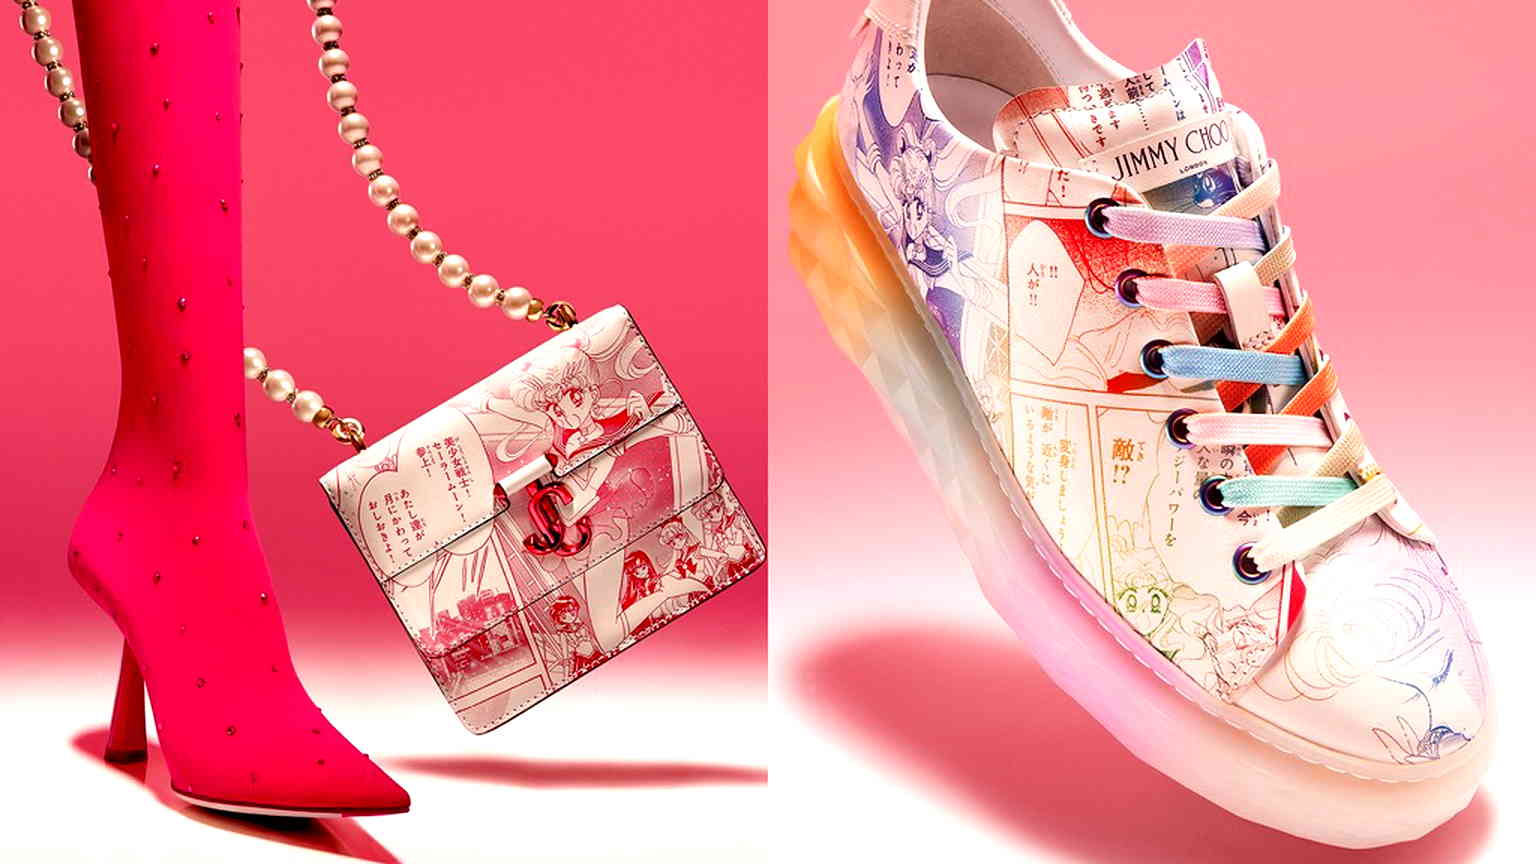 Jimmy Choo releases Sailor Moon capsule collection